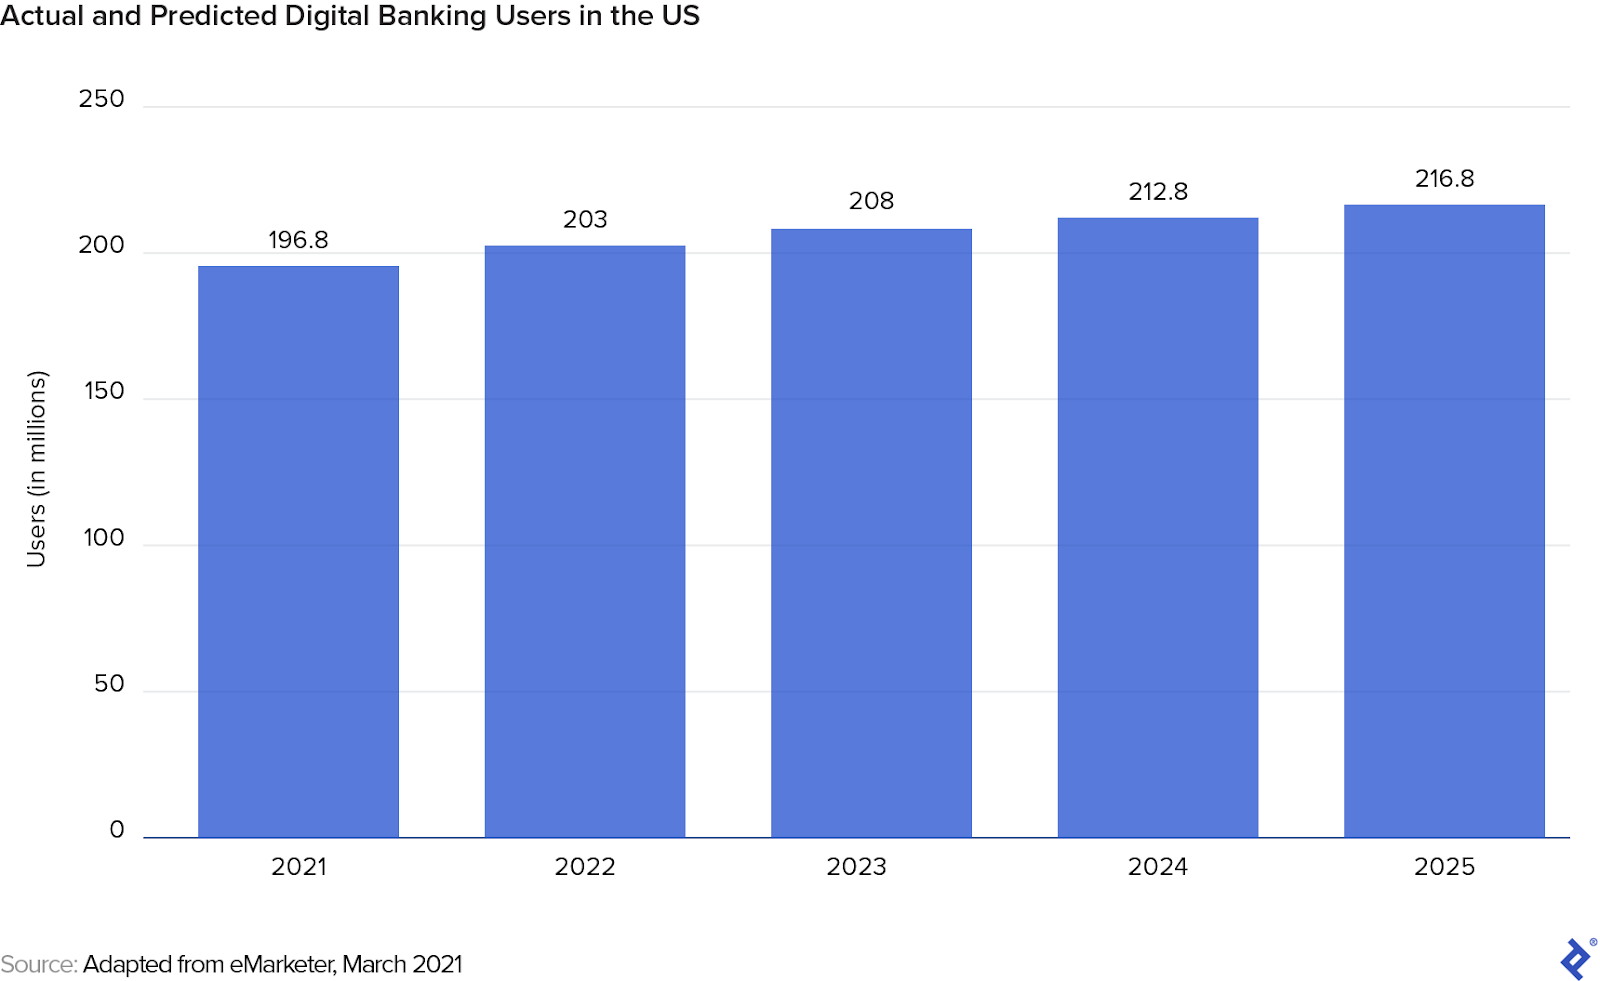 A bar graph shows the total number of US-based digital banking customers for 2021 as well as predicted totals for 2022 through 2025. There were 196.8 million users in 2021; that number is projected to increase to 203 million by the end of 2022 and continue rising to 208 million, 212.8 million, and 216.8 million over the next three years.